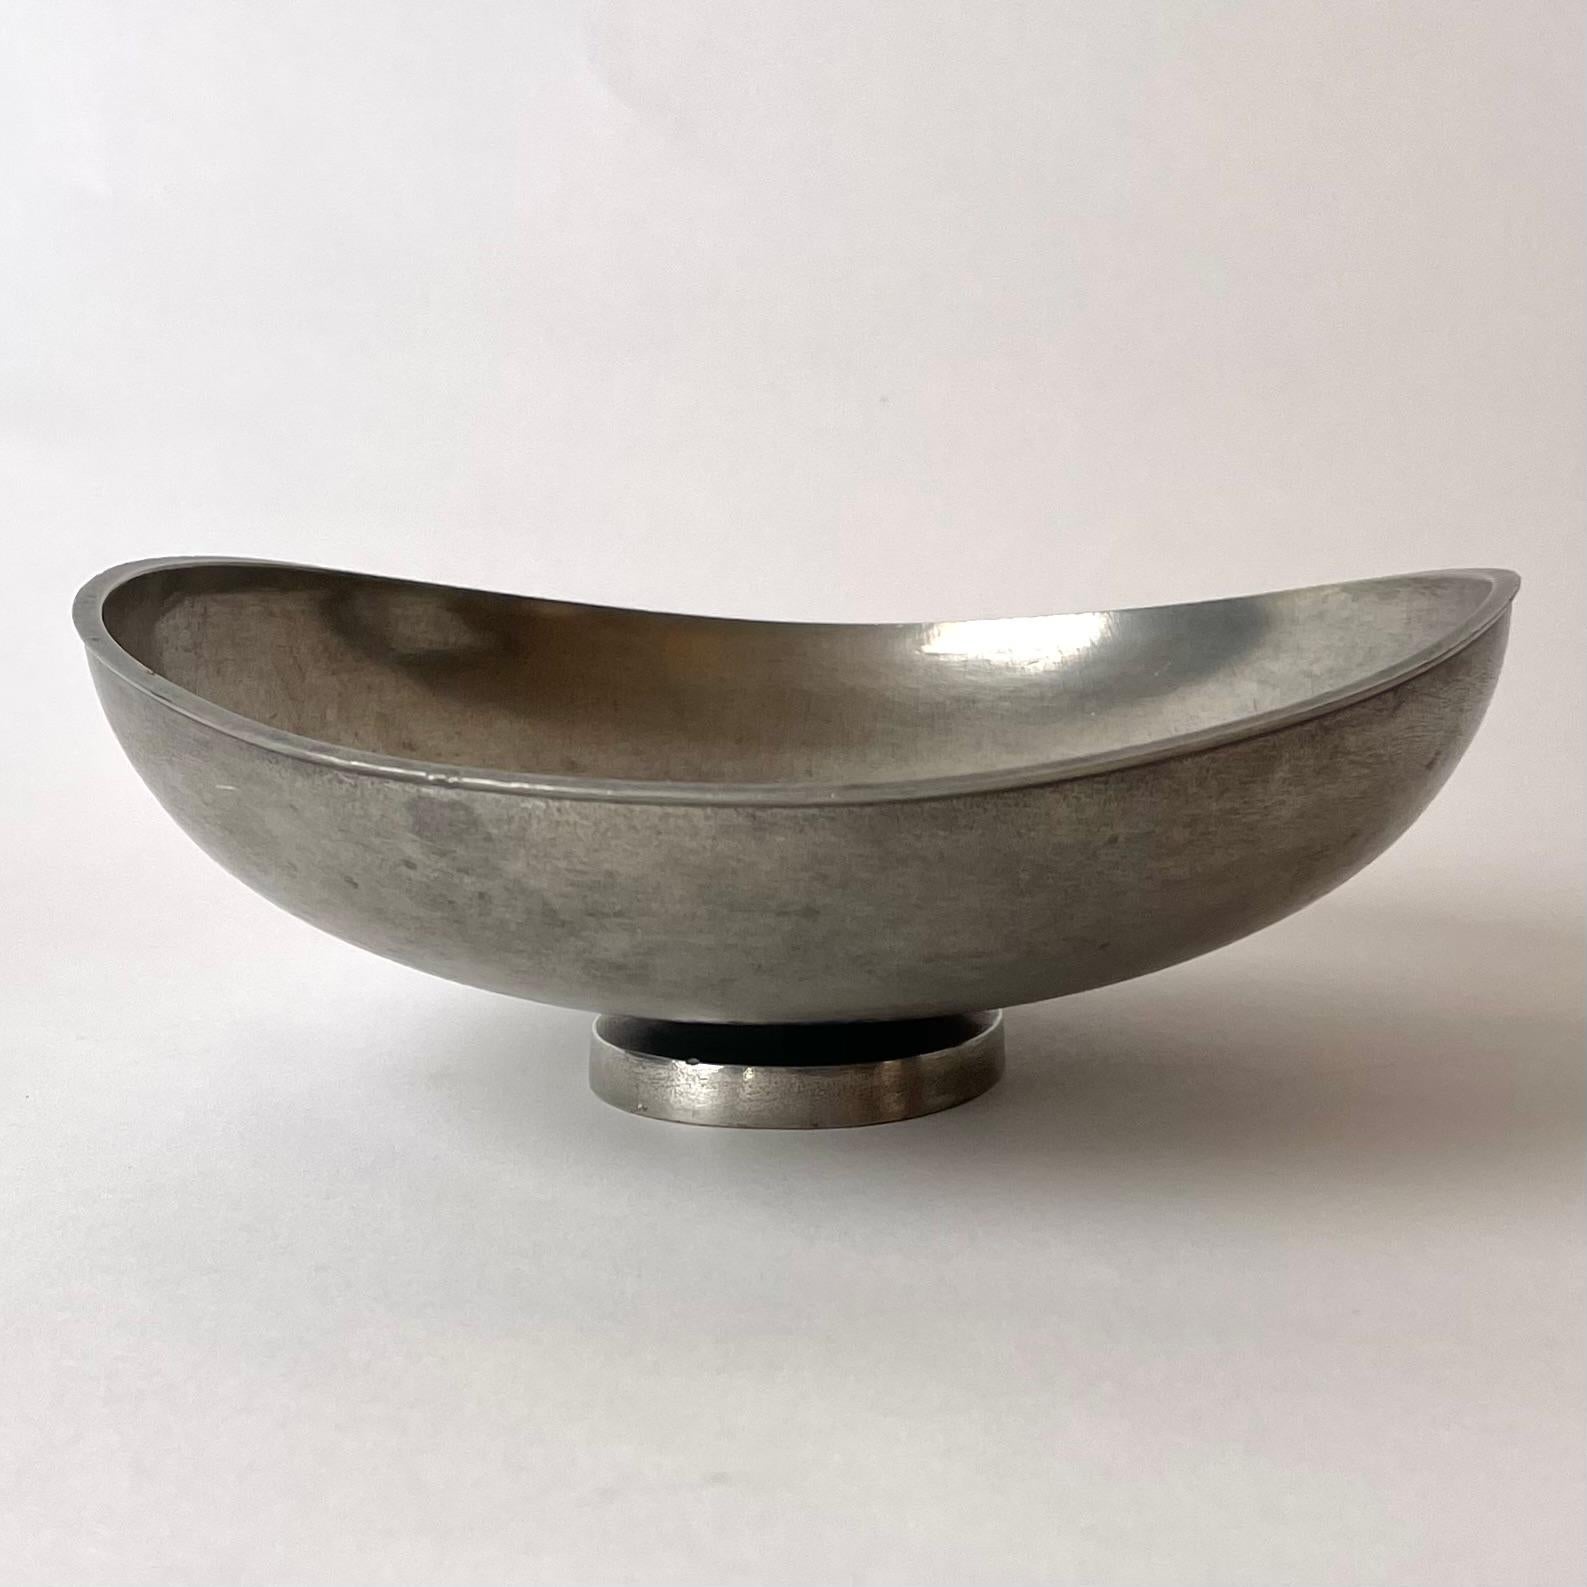 Swedish Pewter fruit bowl designed by Edvin Ollers, Sweden. Mid-20th Century